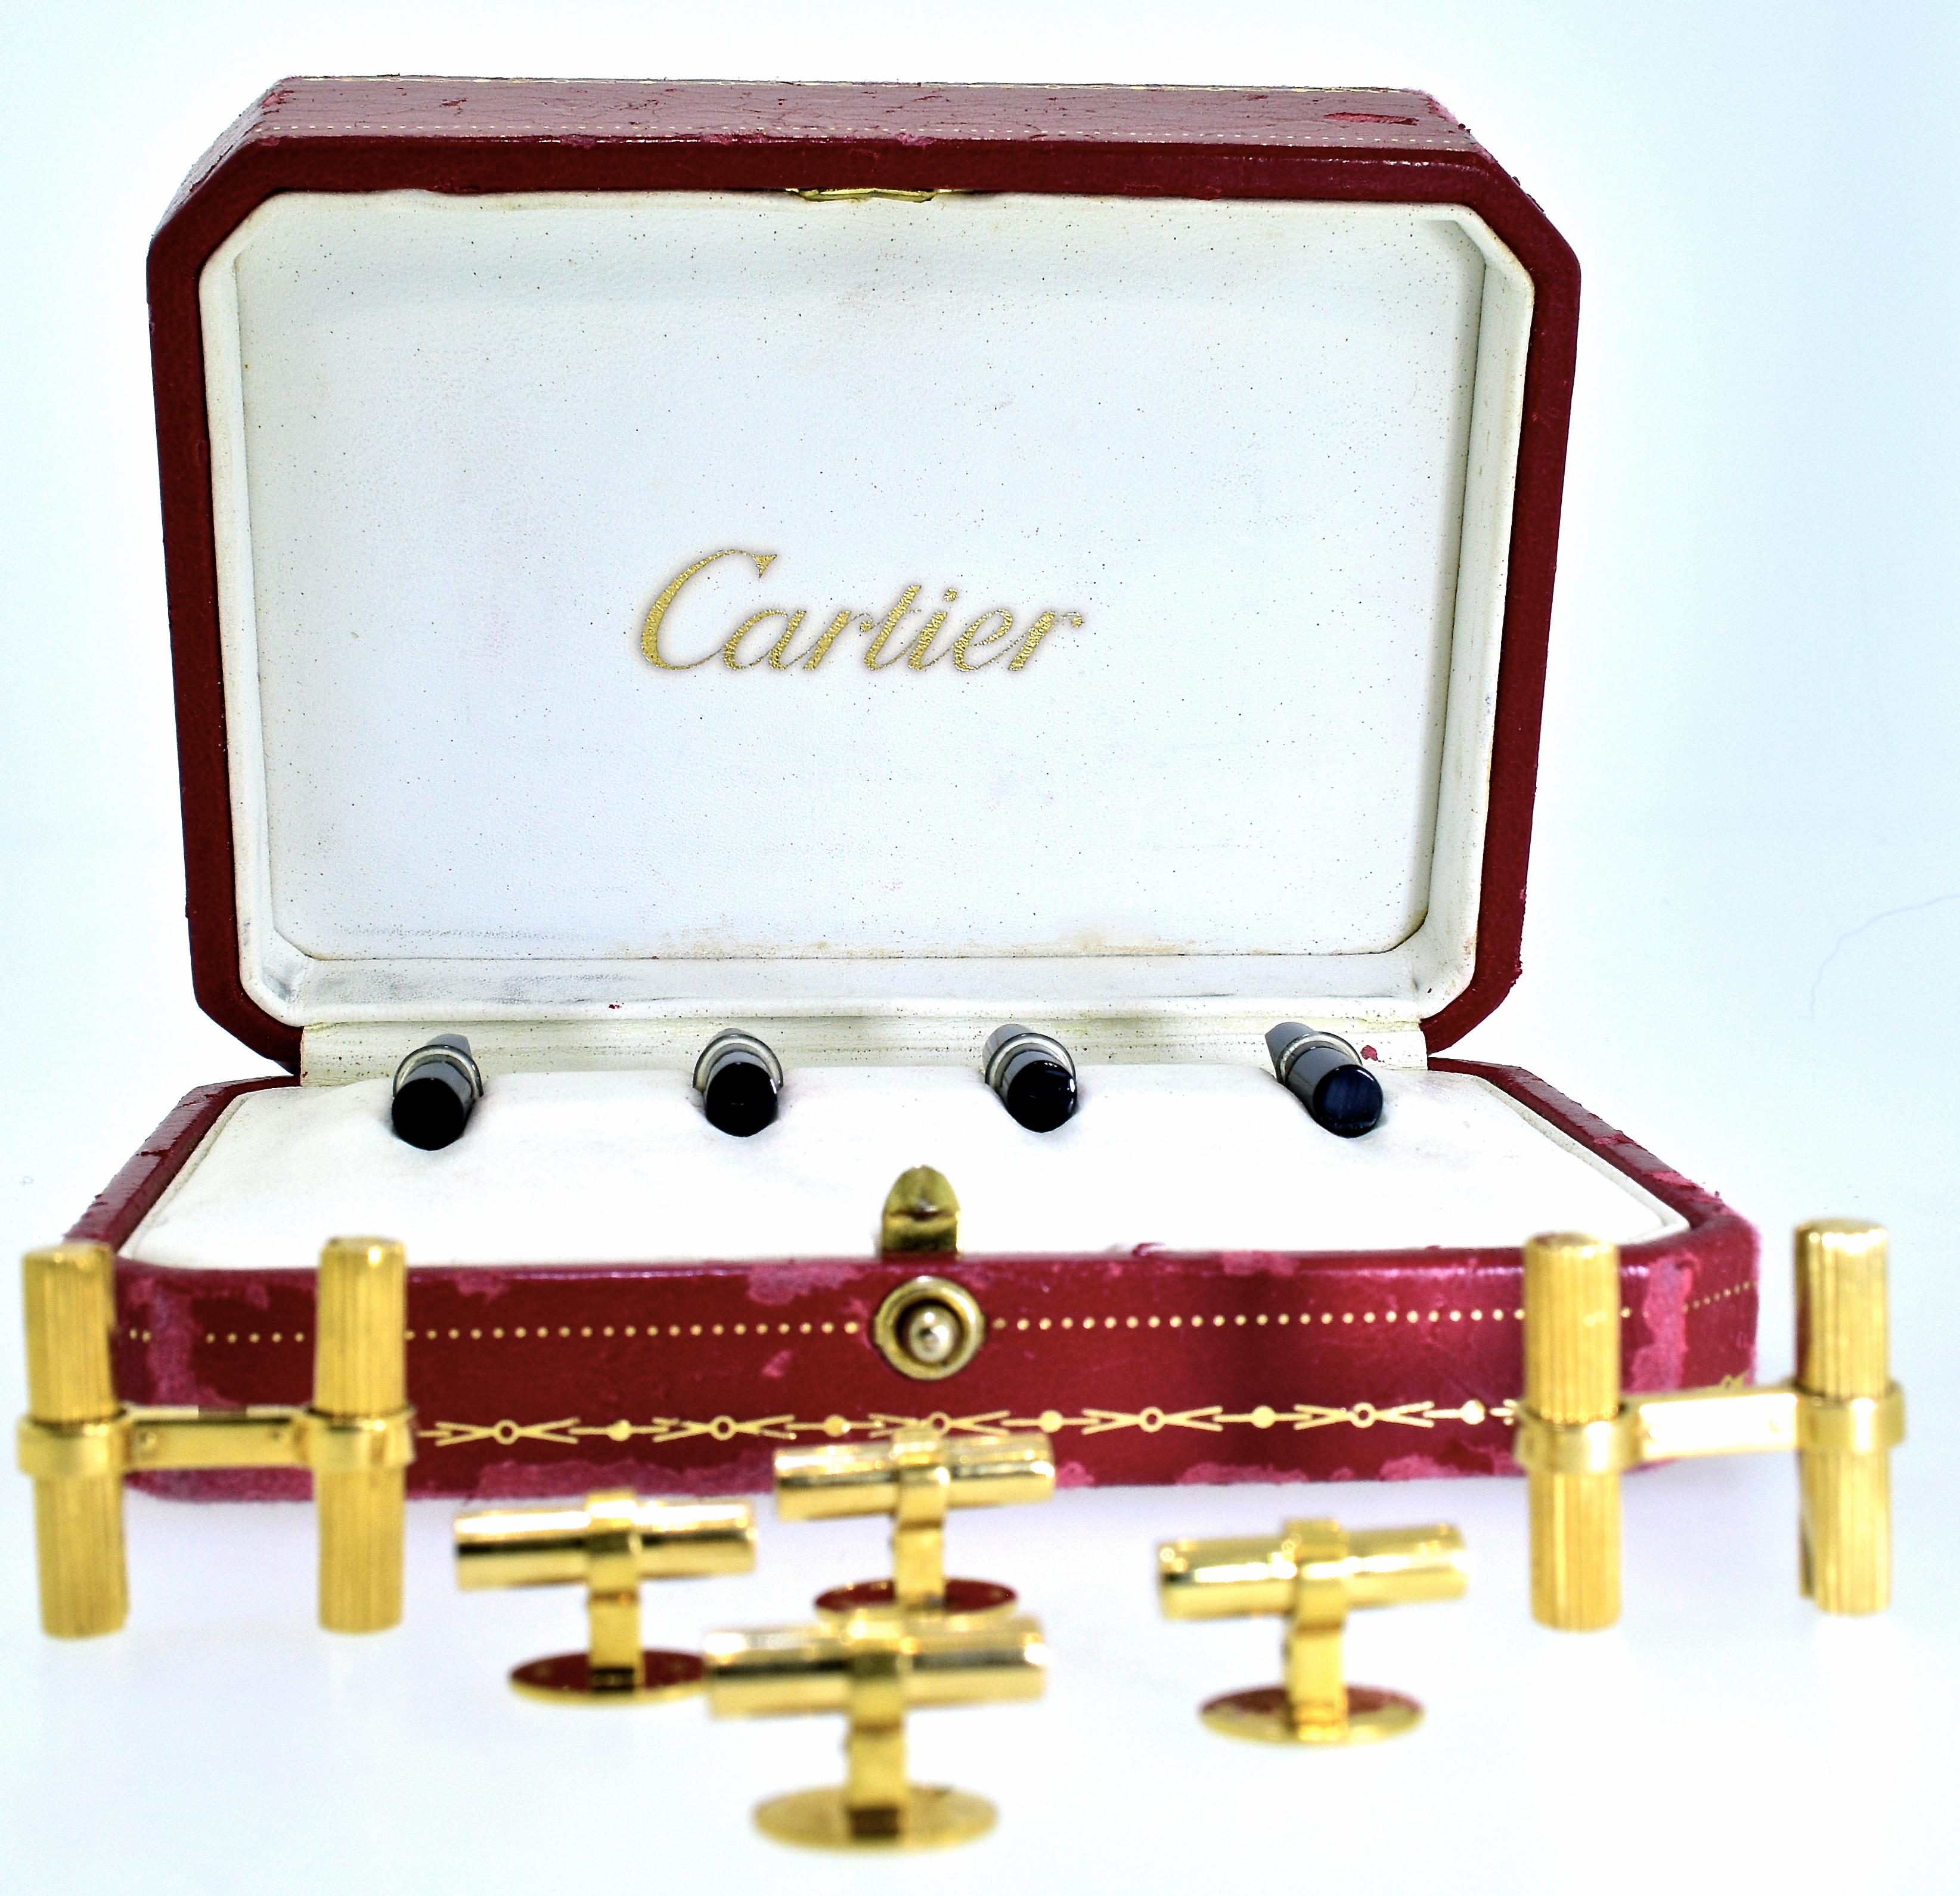 Cartier Paris 18K gold gentleman's dress set composed of cufflinks and shirt studs in gold batons which are  interchangeable with onyx batons and rock crystal batons.  Wear all gold, or all black onyx, or white rock crystal - or wear the different